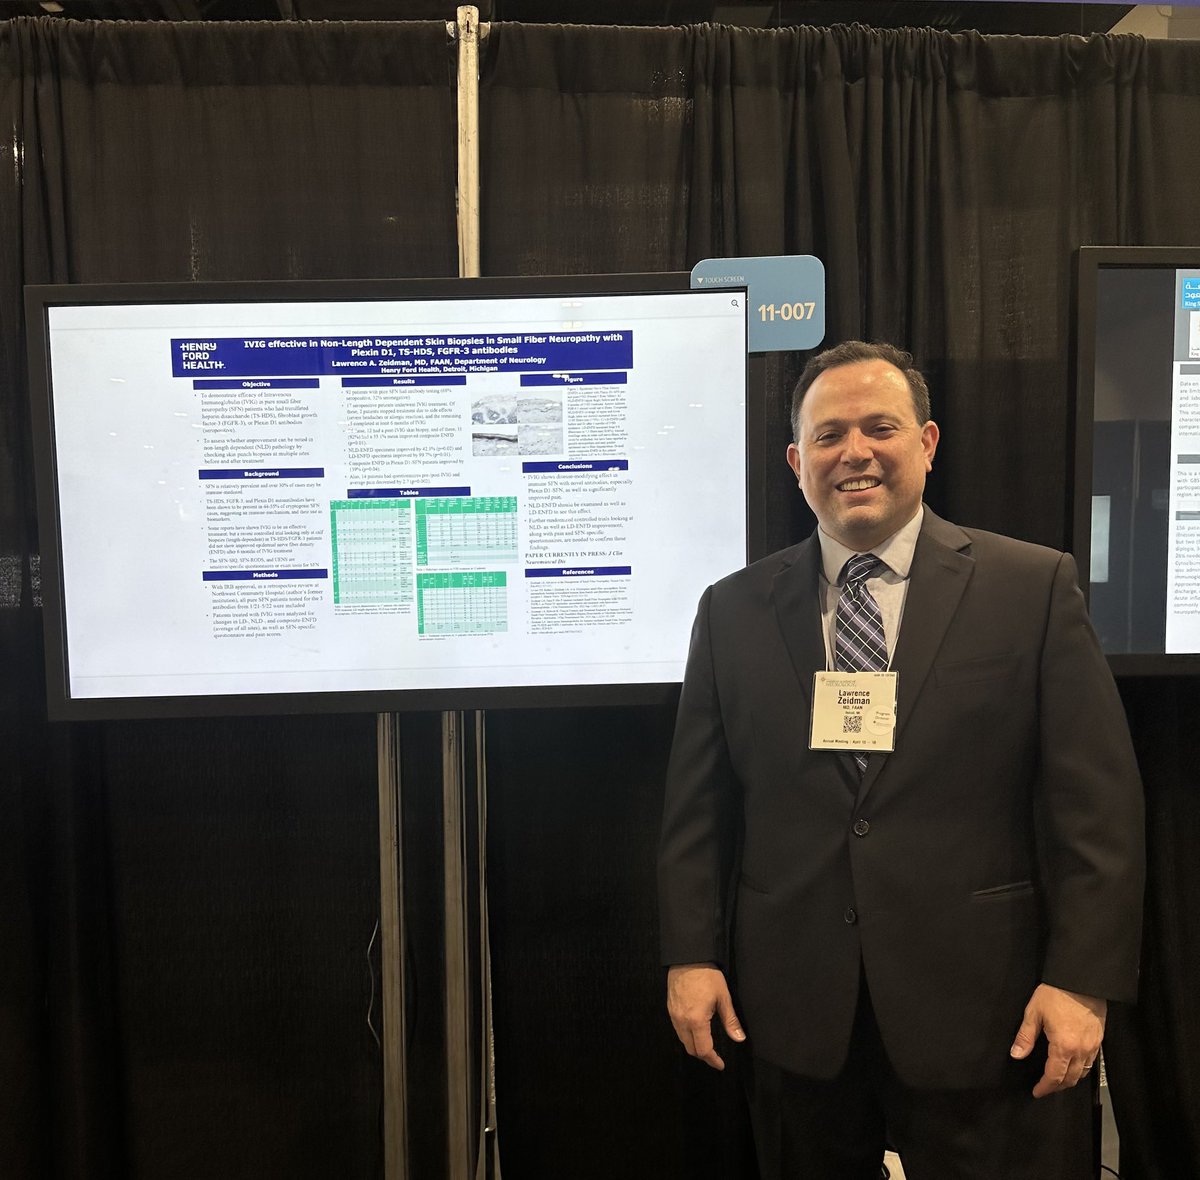 #AANAM Great discussion on immune small fiber neuropathy treatment with IVIG this morning at my AAN poster “IVIG effective in Non-Length Dependent Skin Biopsies in Small Fiber Neuropathy with Plexin D1, TS-HDS, and FGFR-3 antibodies”